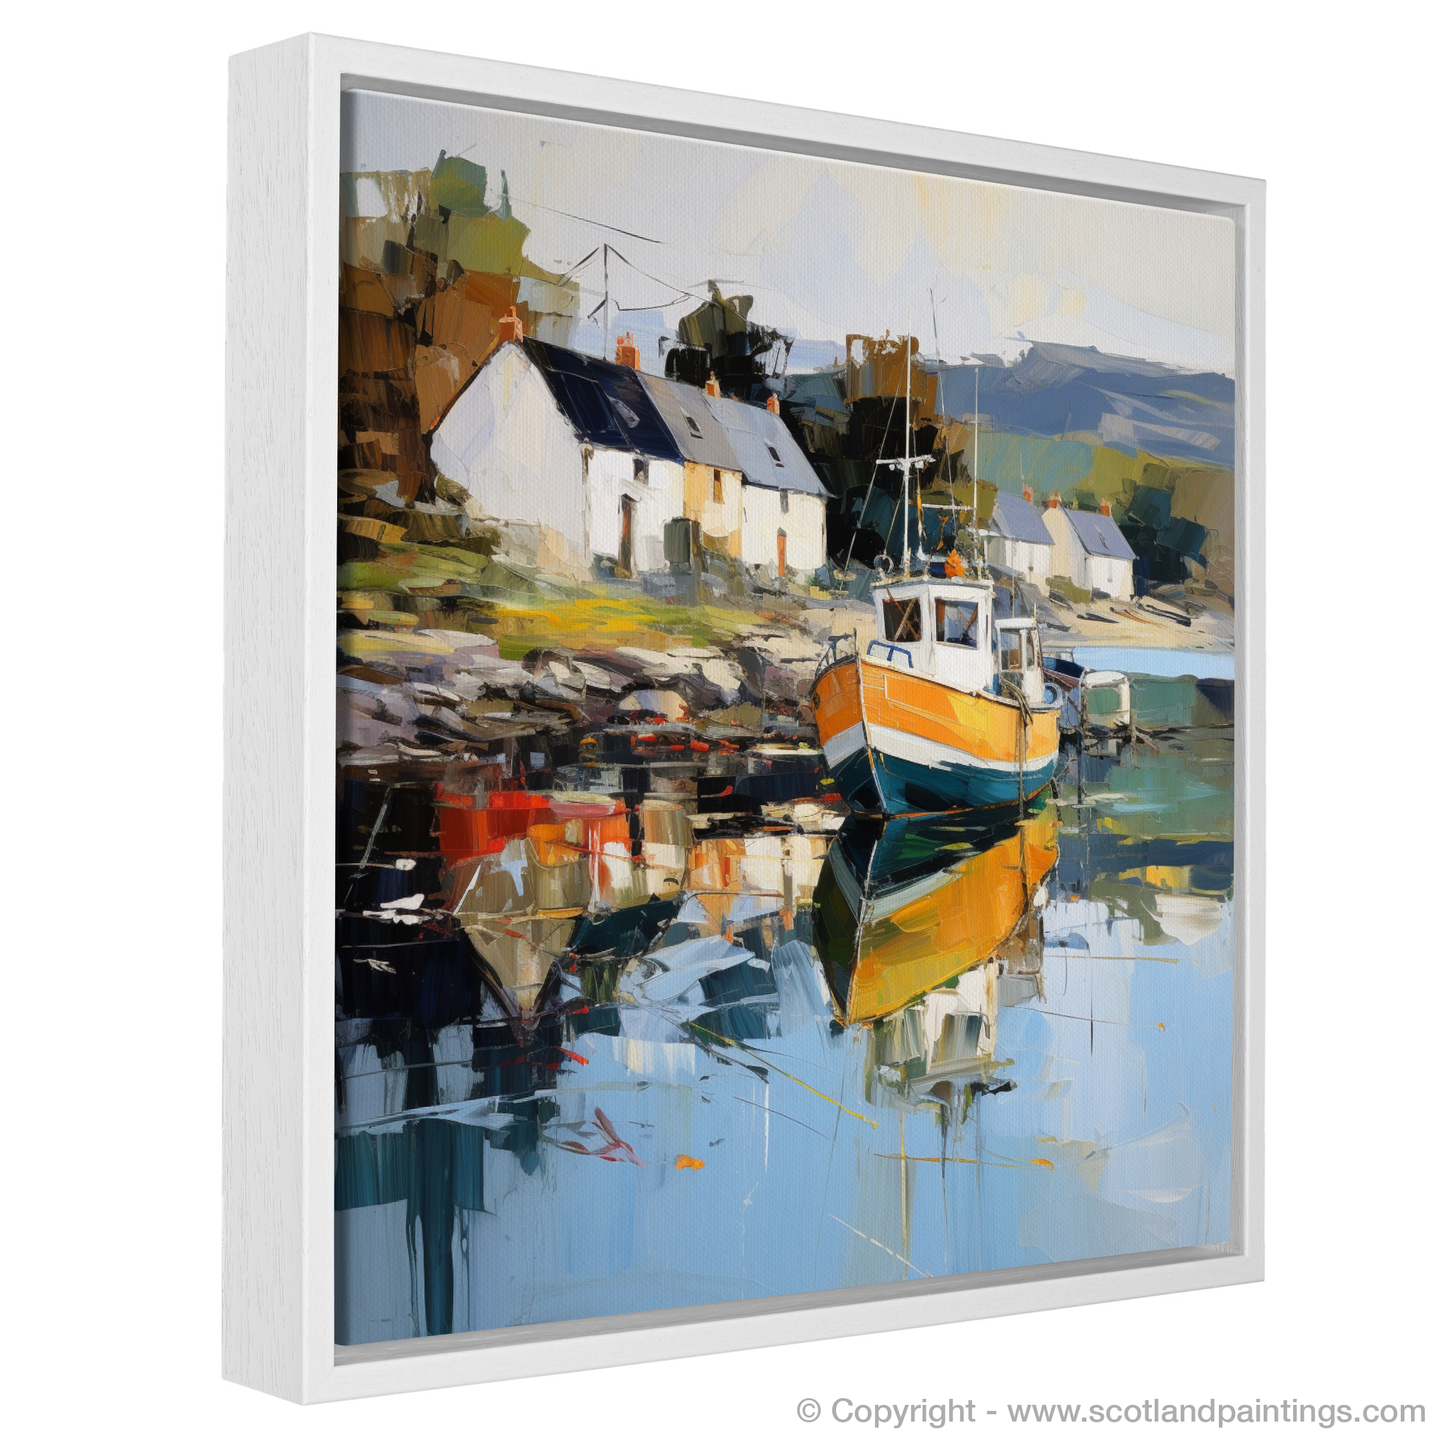 Painting and Art Print of Tayvallich Harbour, Argyll entitled "Vibrant Reflections of Tayvallich Harbour".